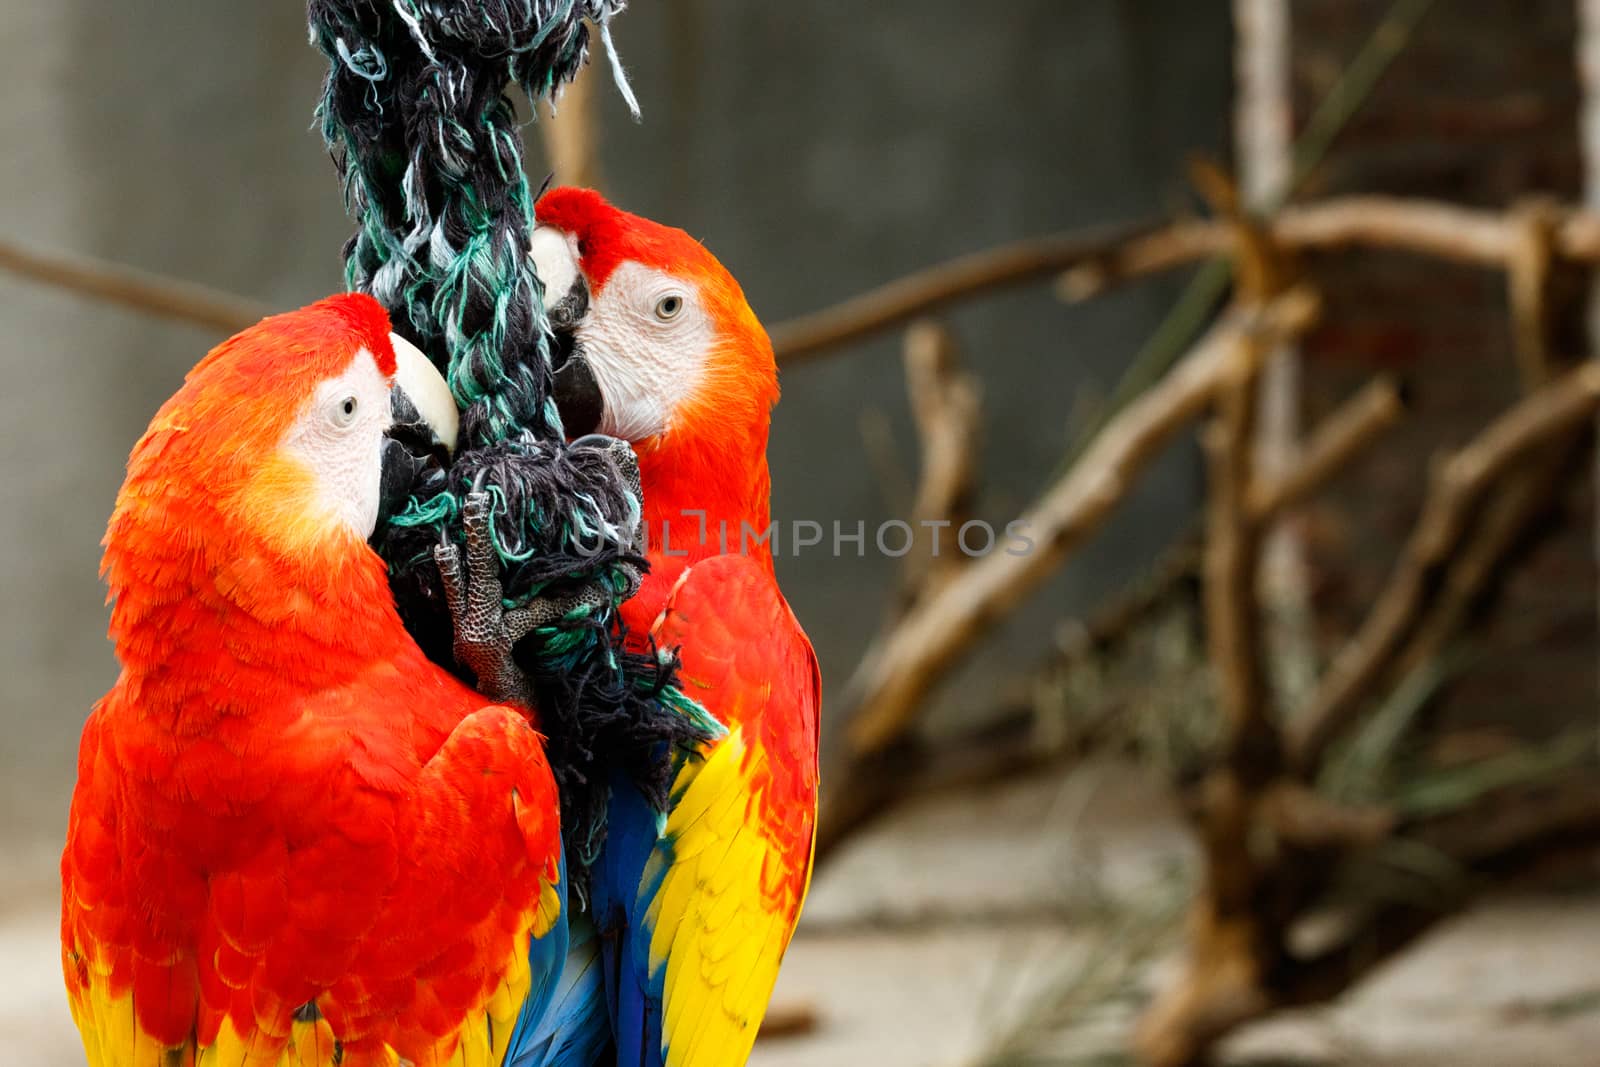 Parrots clinging on a rope with their beaks.